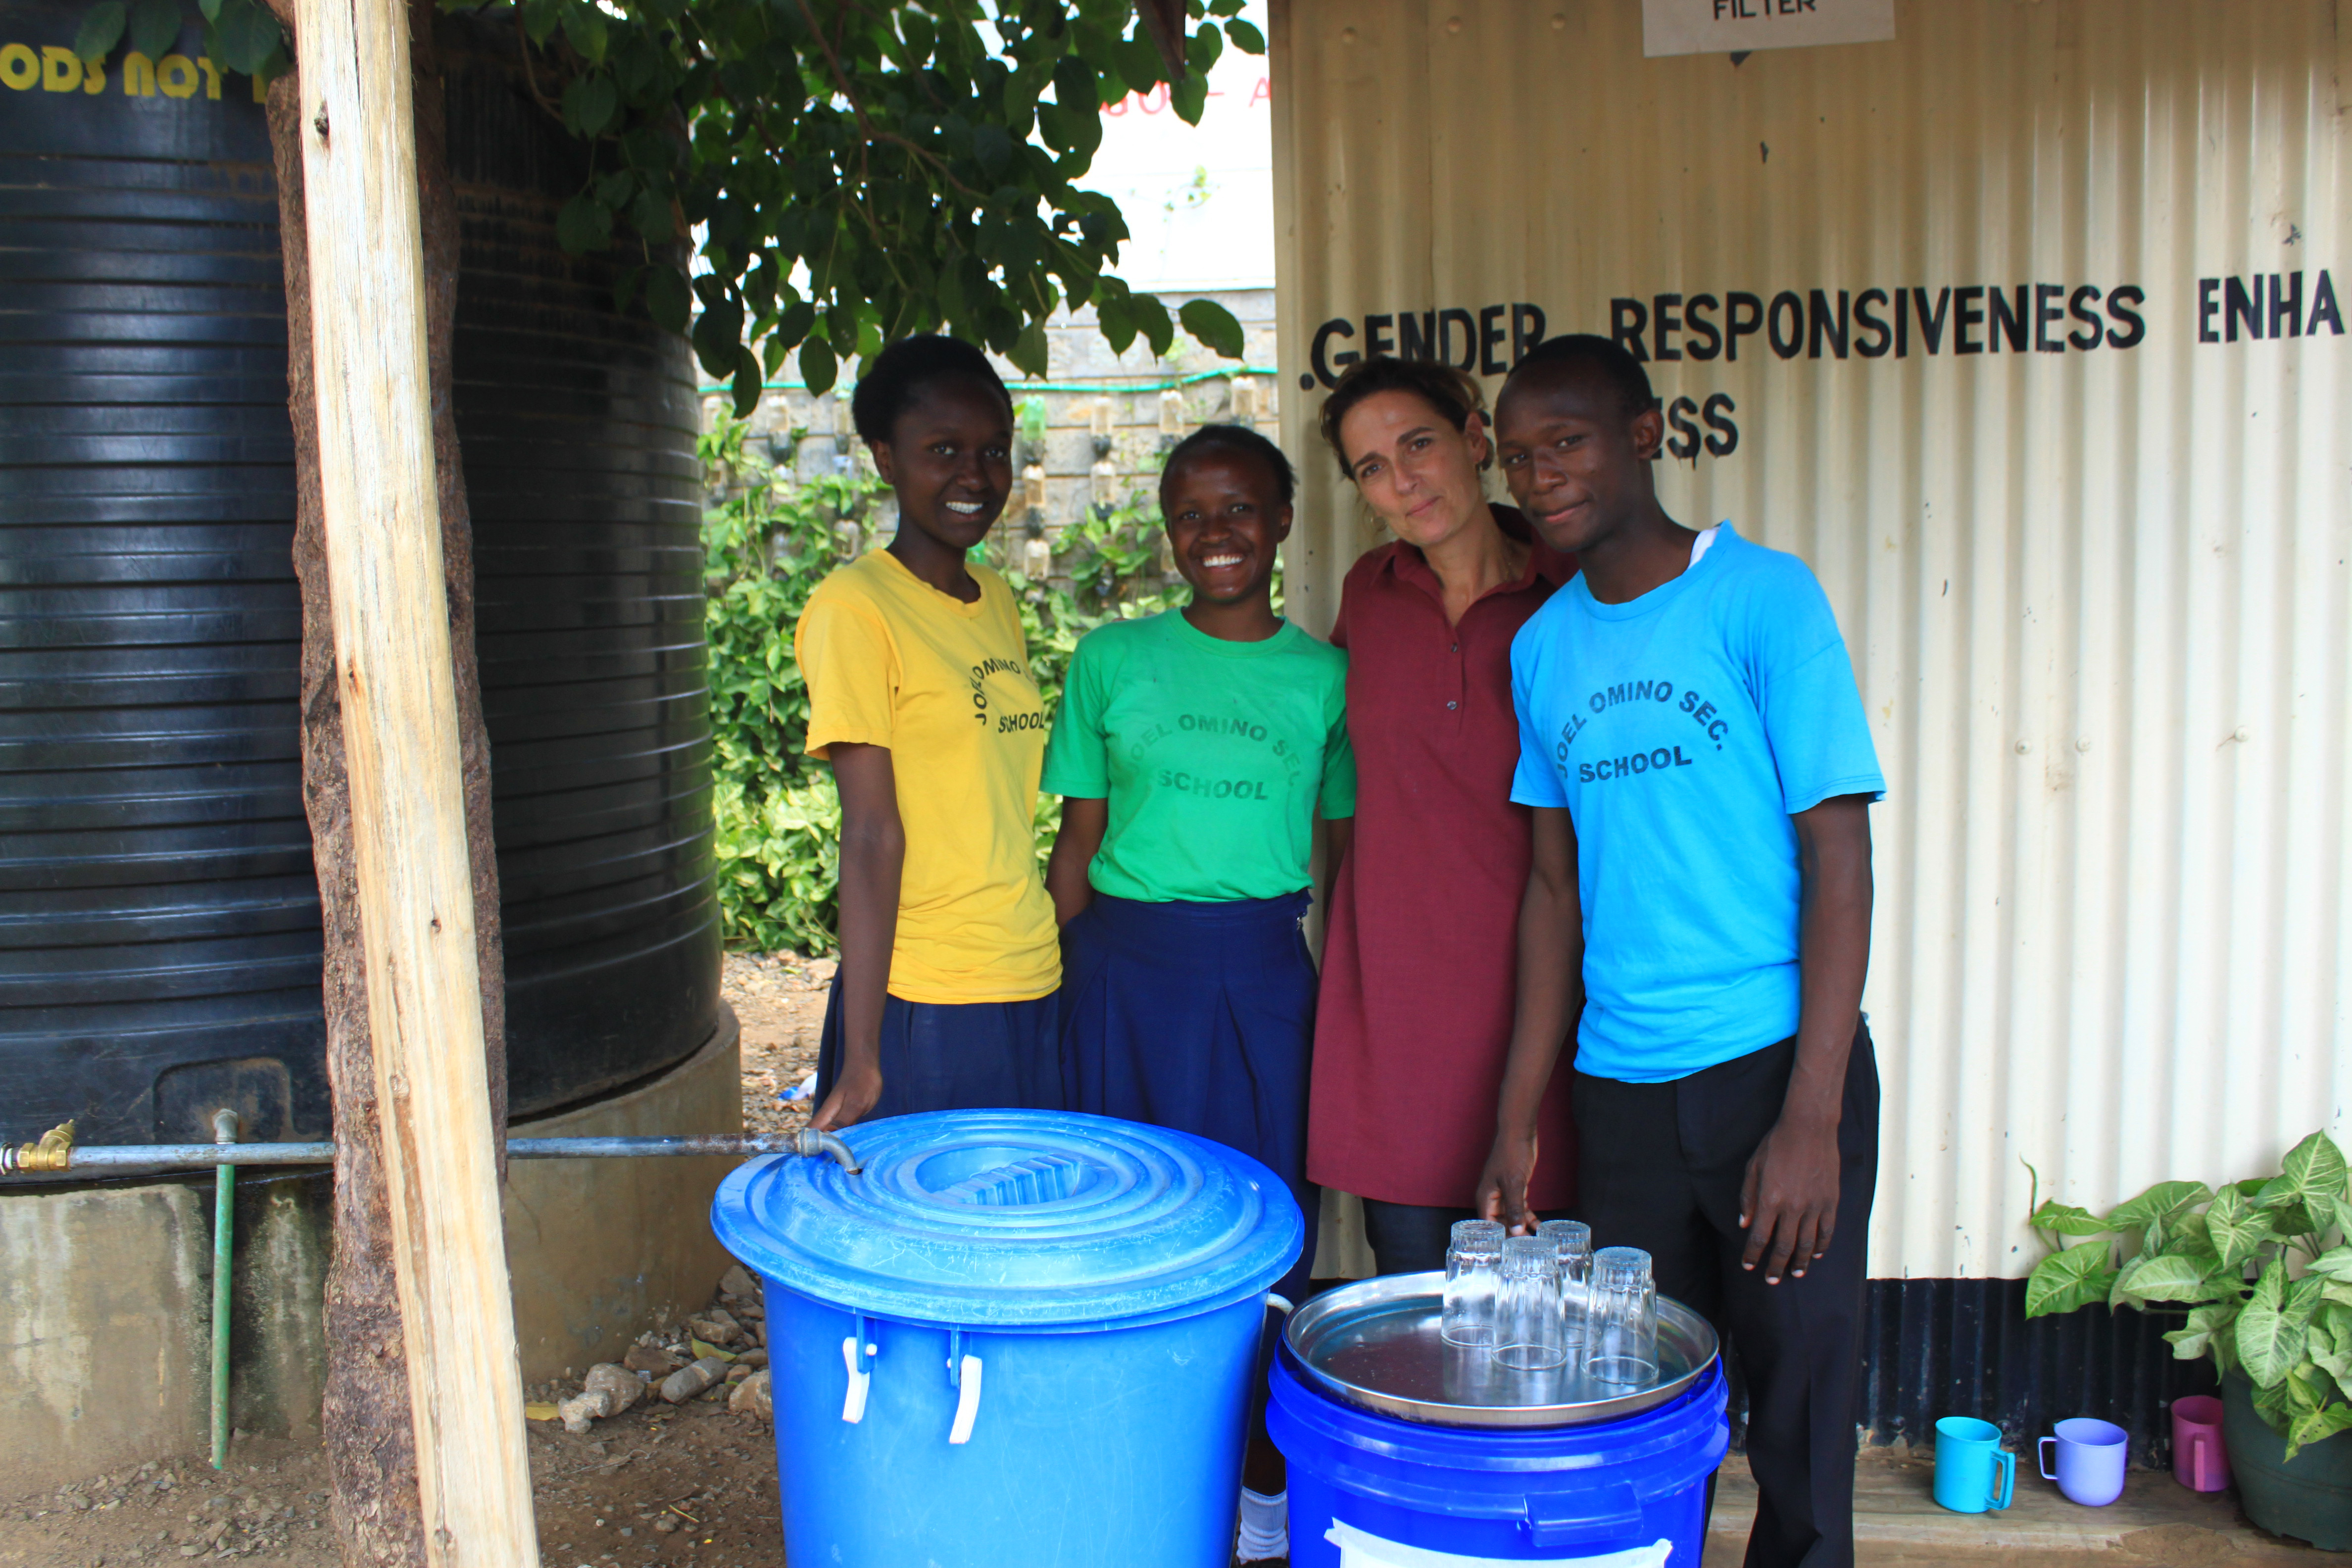 Image 1 - Michal with students, by a bio-sand filtration system set up in their school by Joel Omino in Kisumu, Kenya.